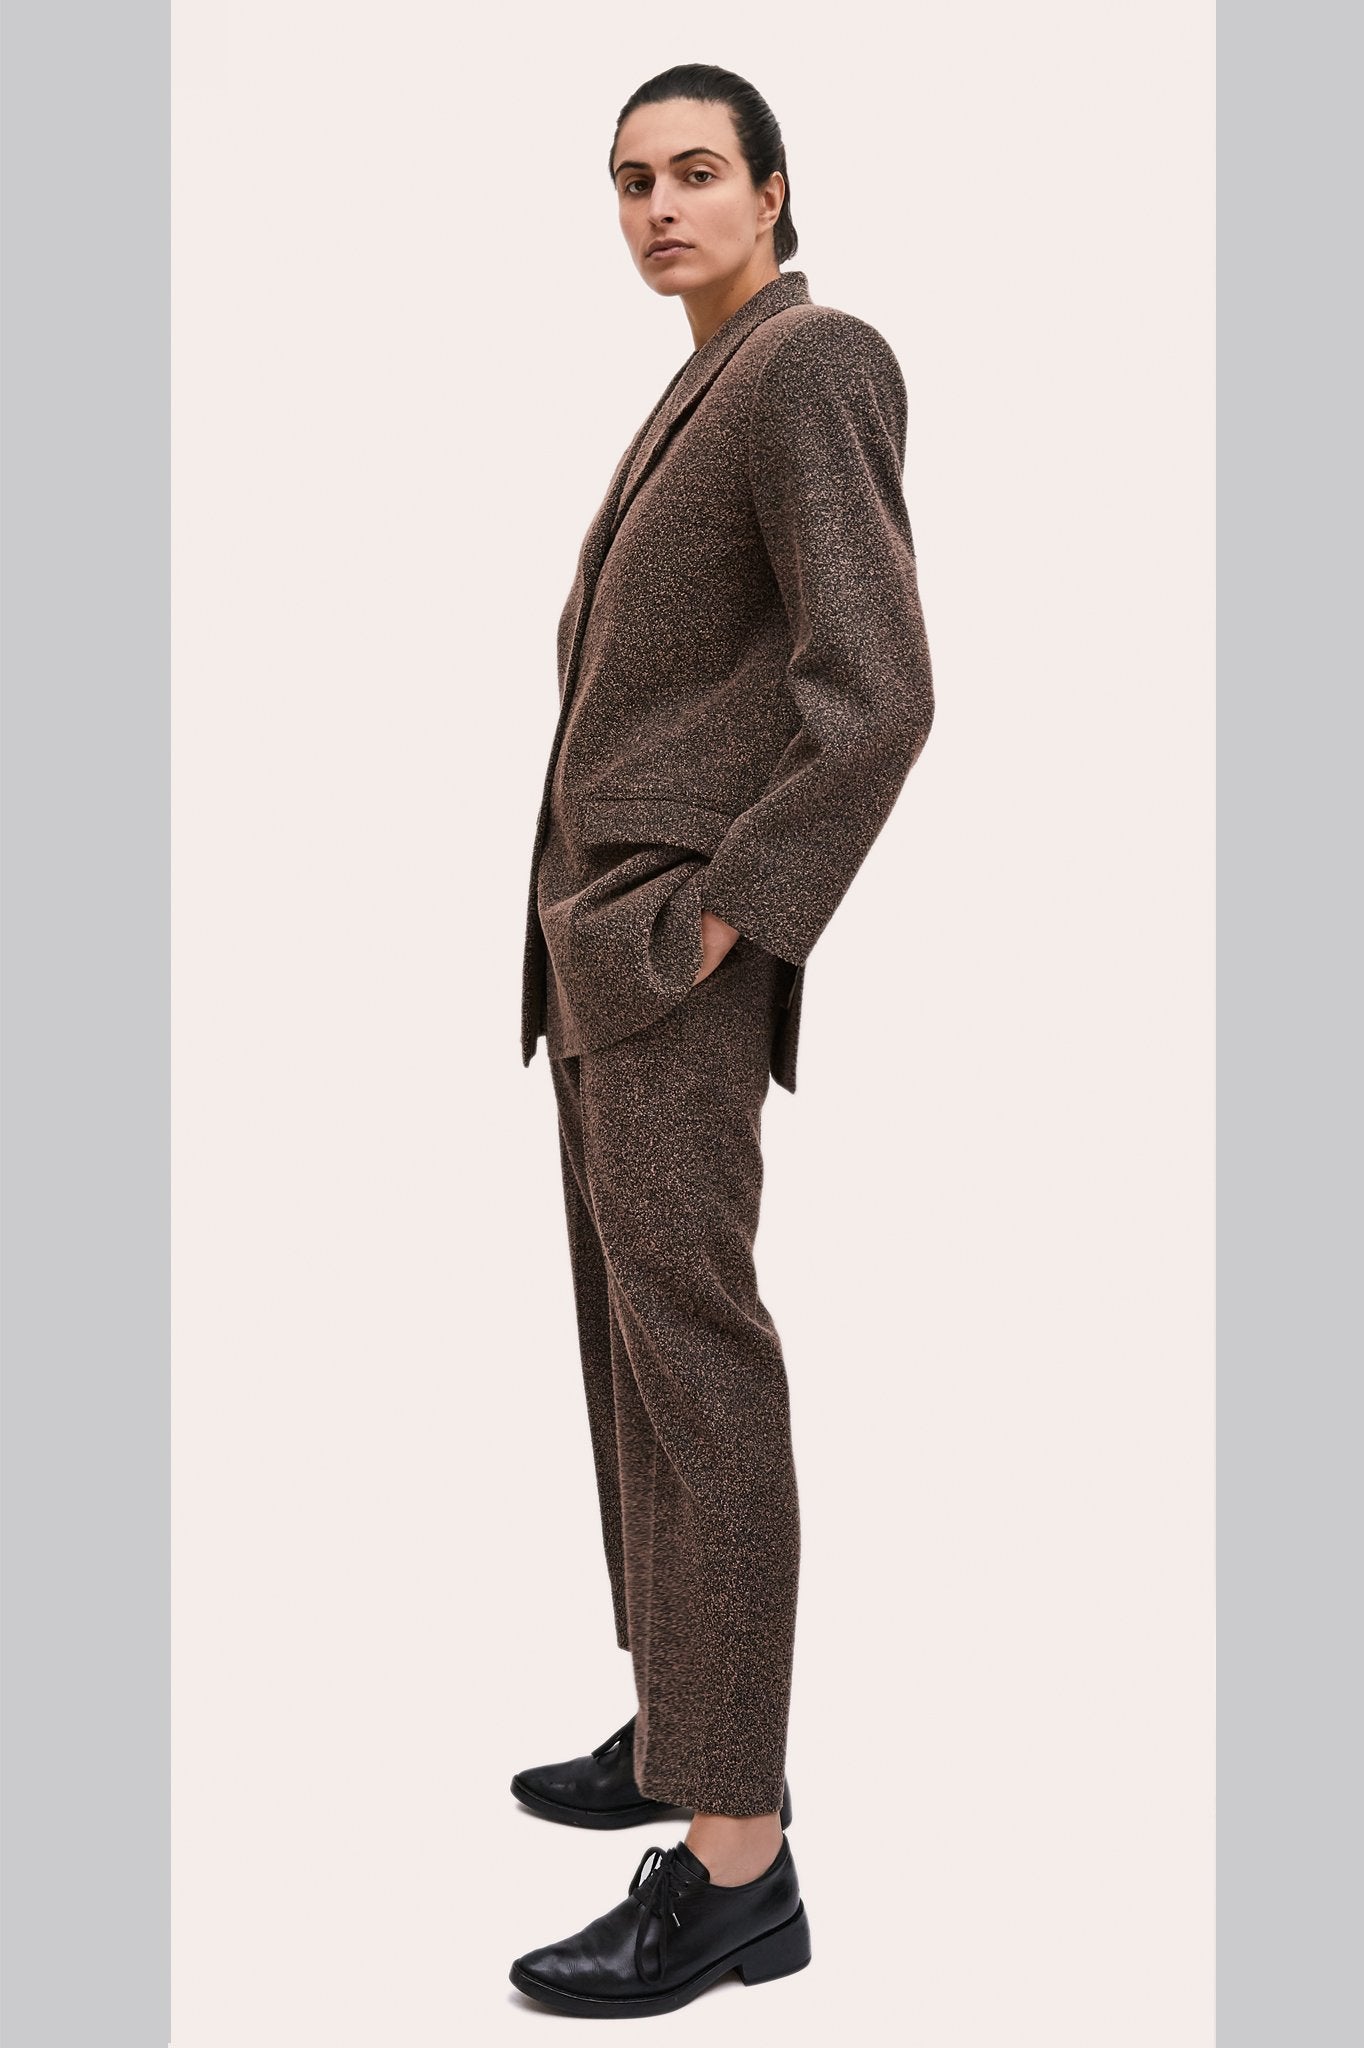 Textured wool "Dick Tracy" 3-Piece Suit